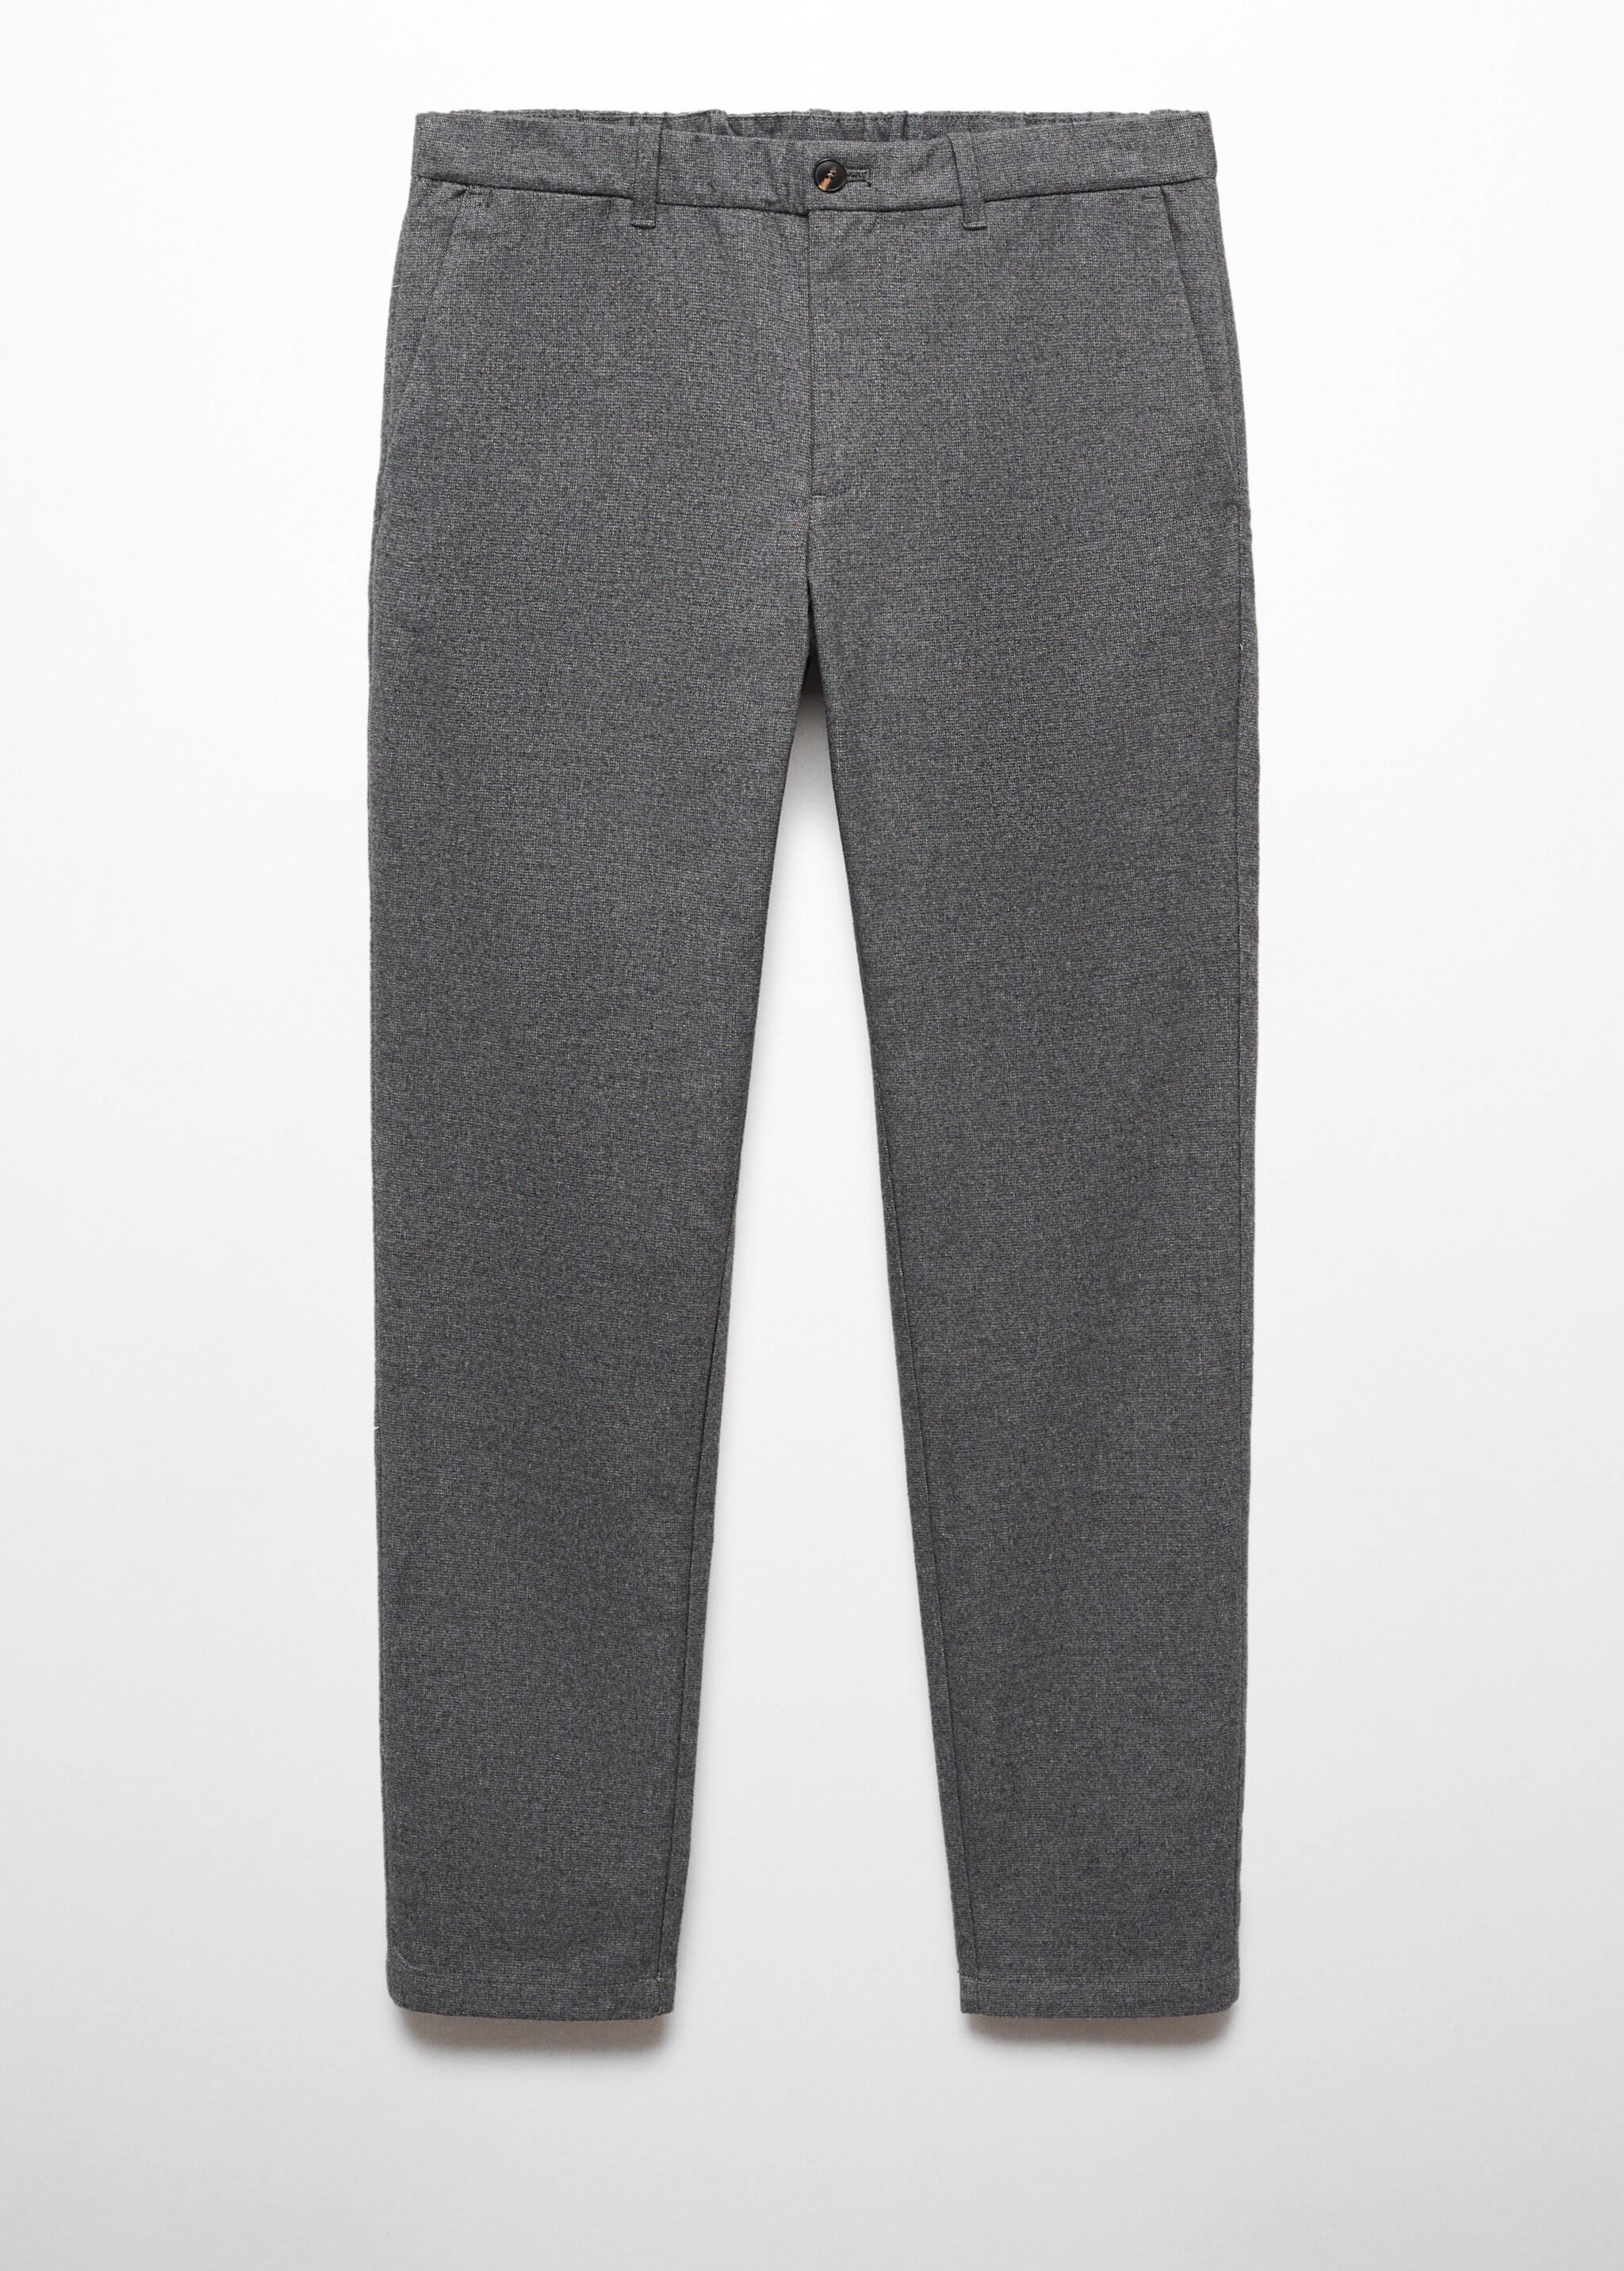 Slim fit structured cotton trousers - Article without model